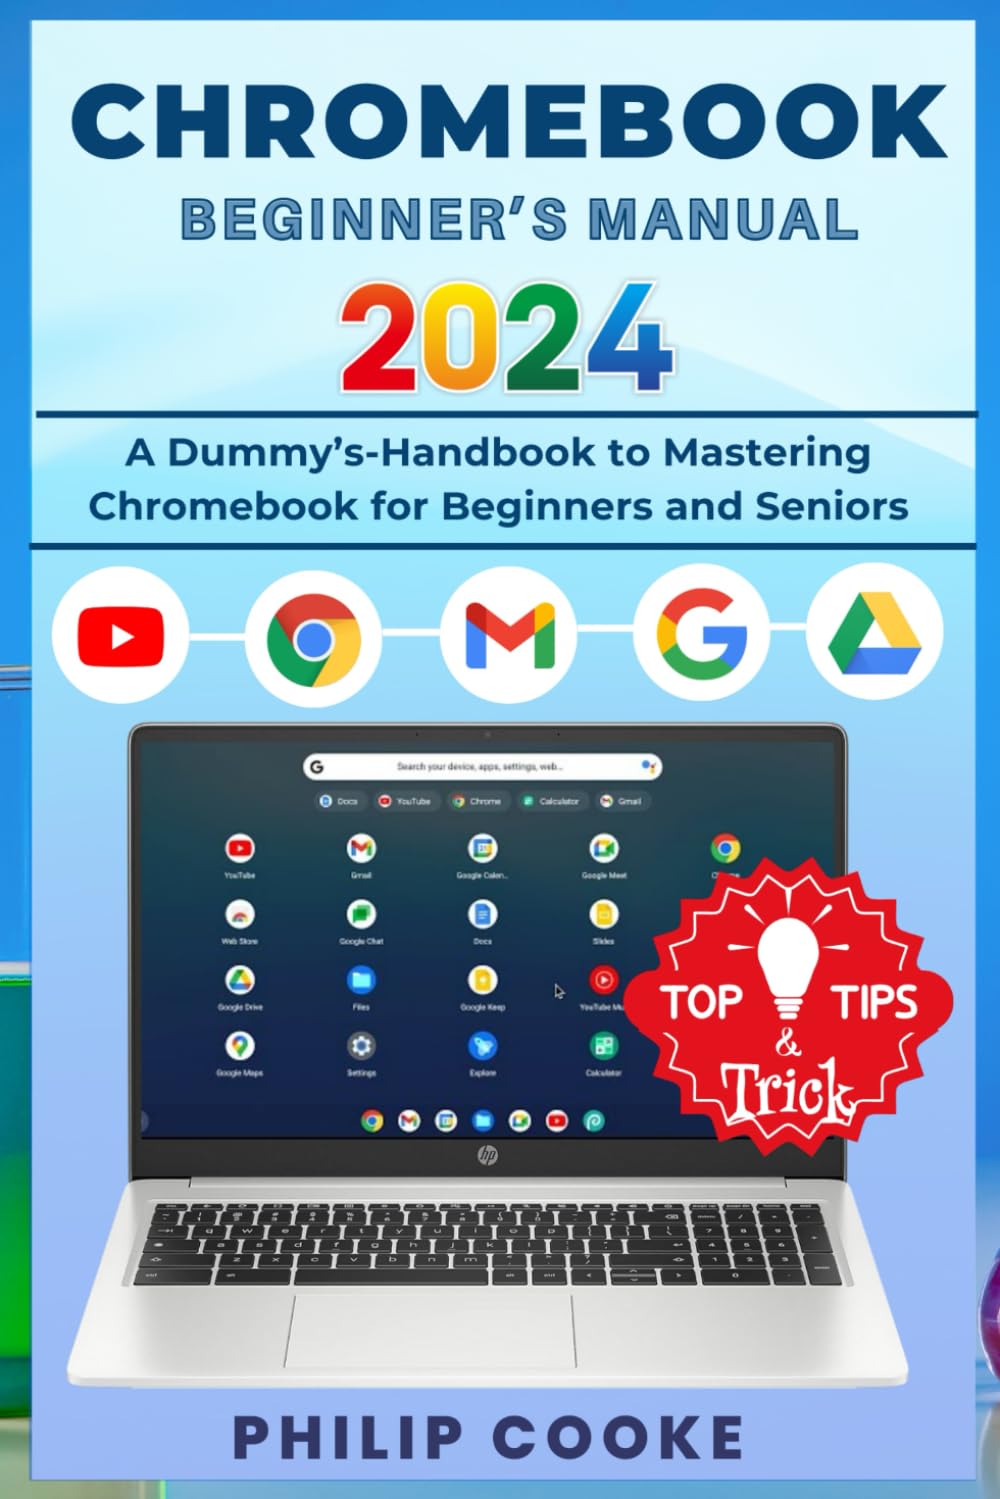 CHROMEBOOK BEGINNERS MANUAL: A Dummy's-Handbook to Mastering Chromebook for Beginners and Seniors